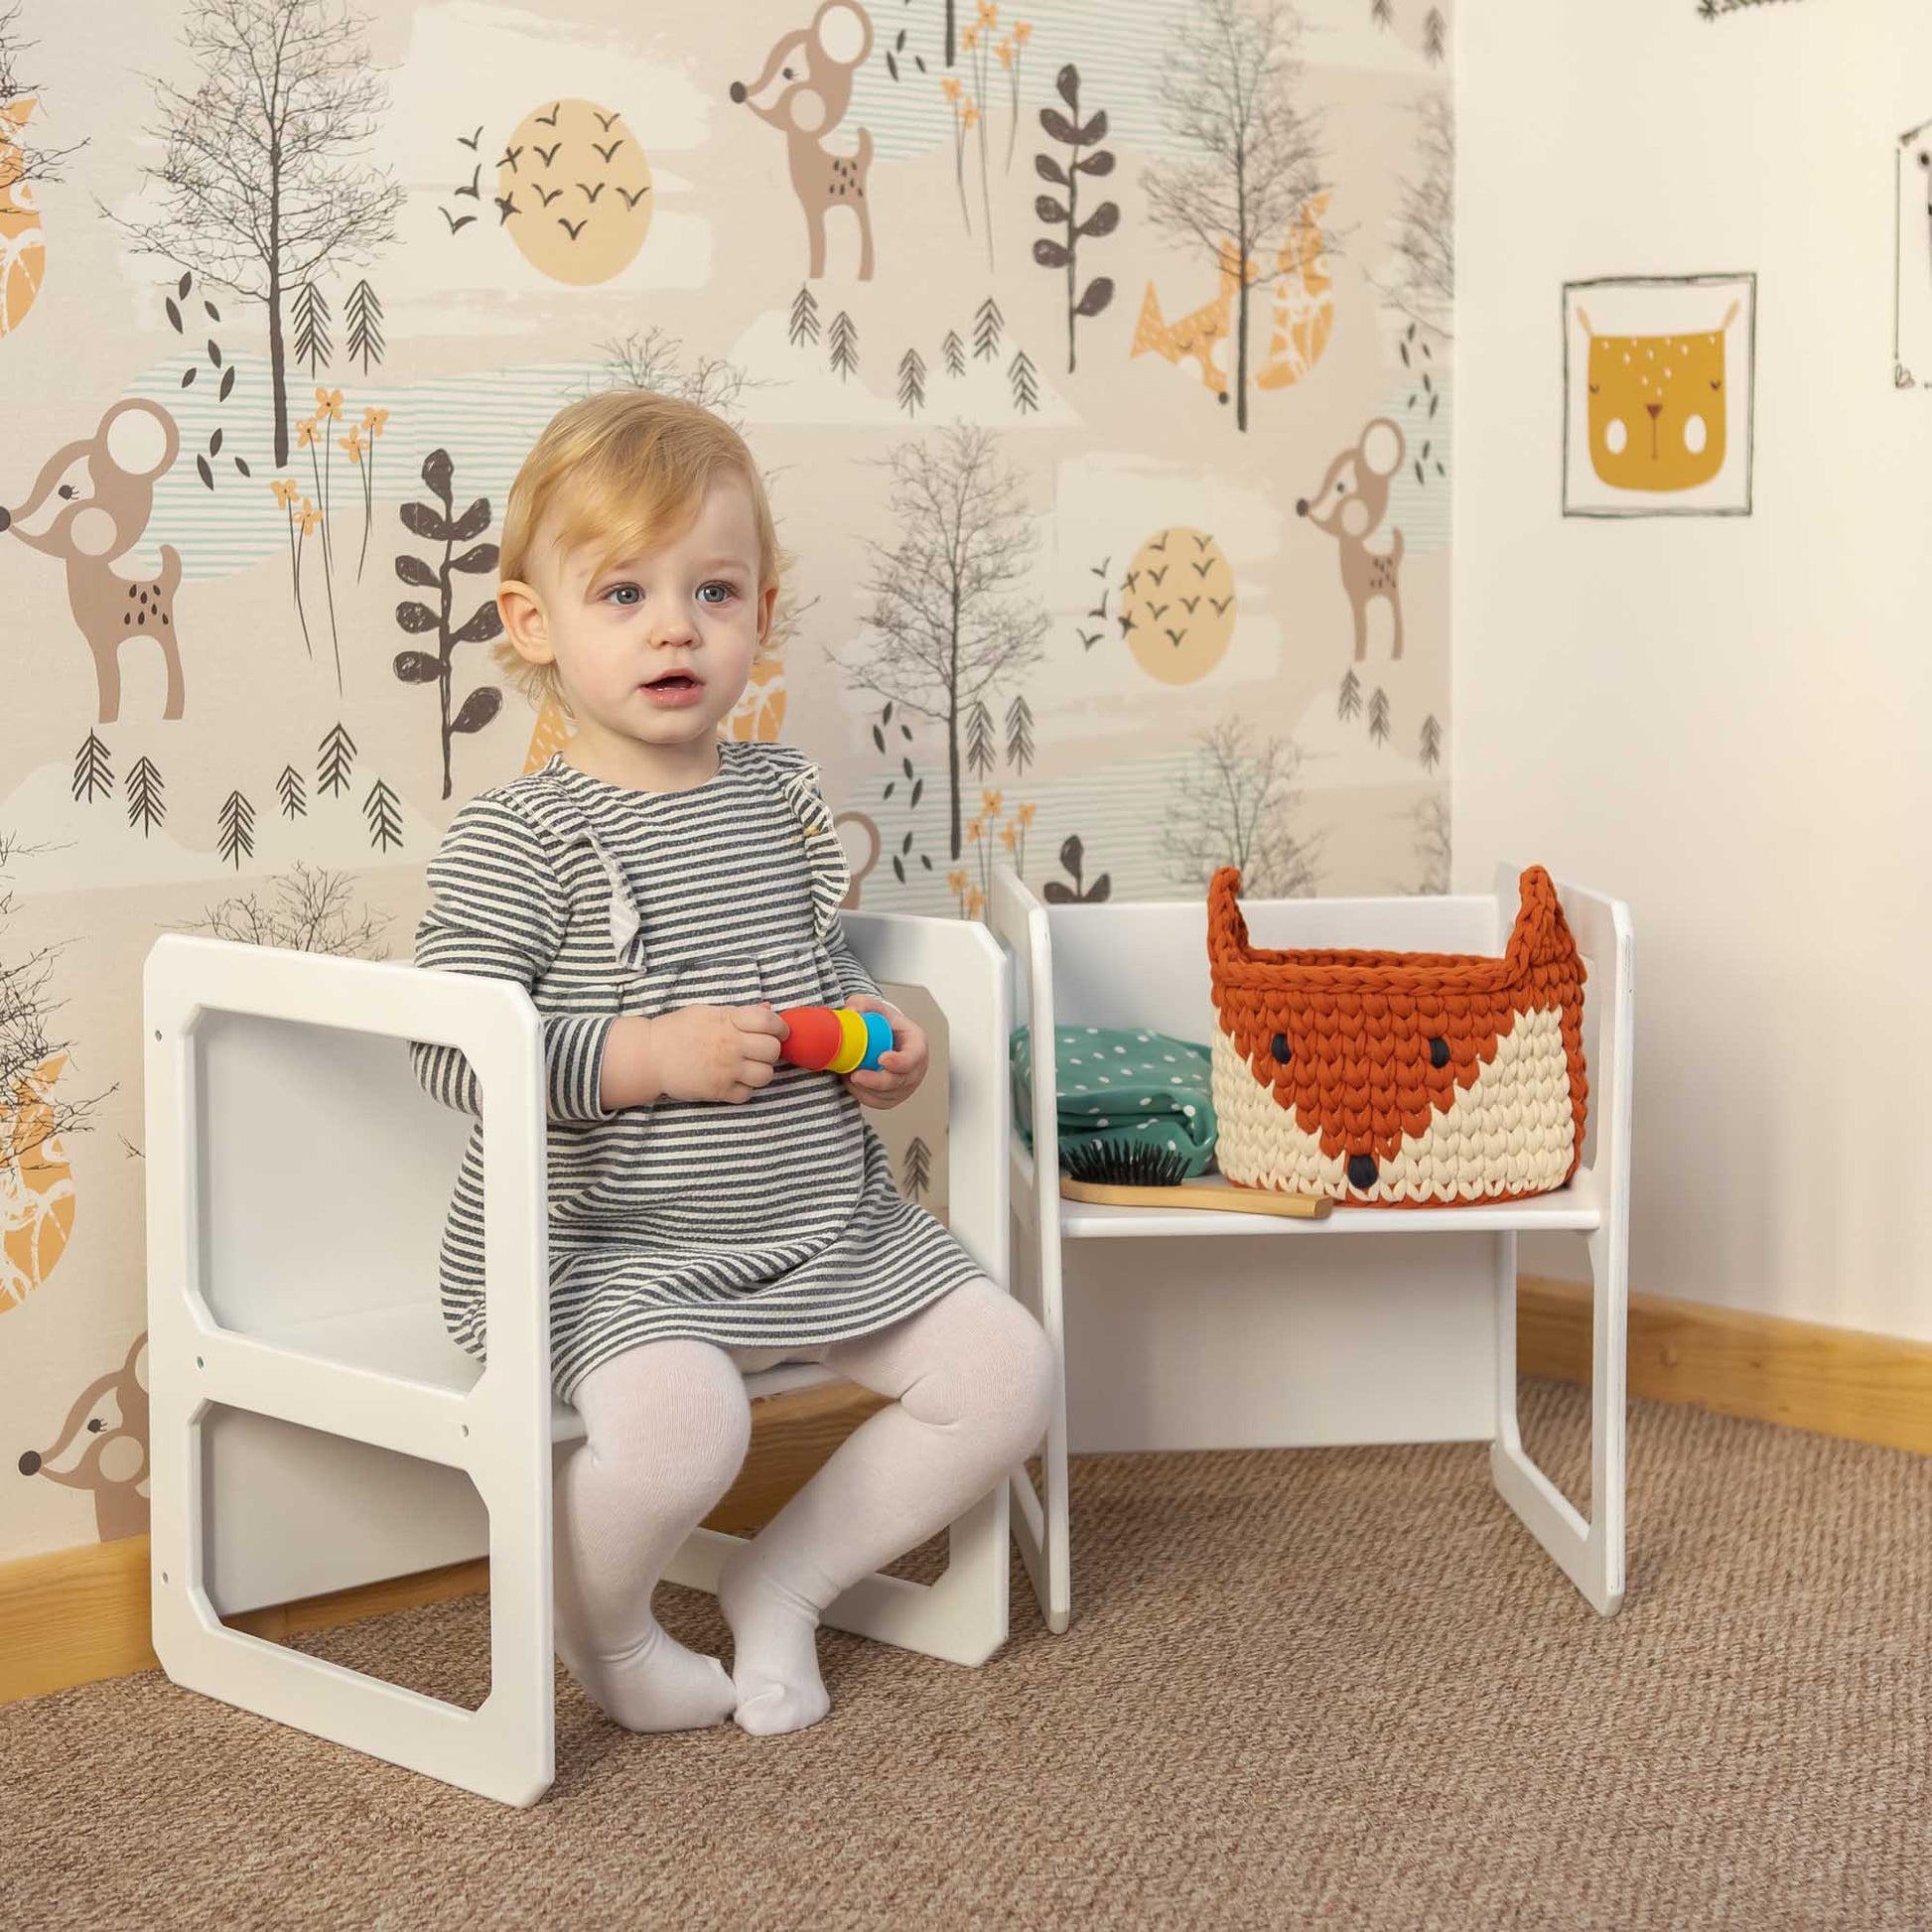 A little girl sitting on a Sweet Home From Wood Montessori weaning chair in a room.